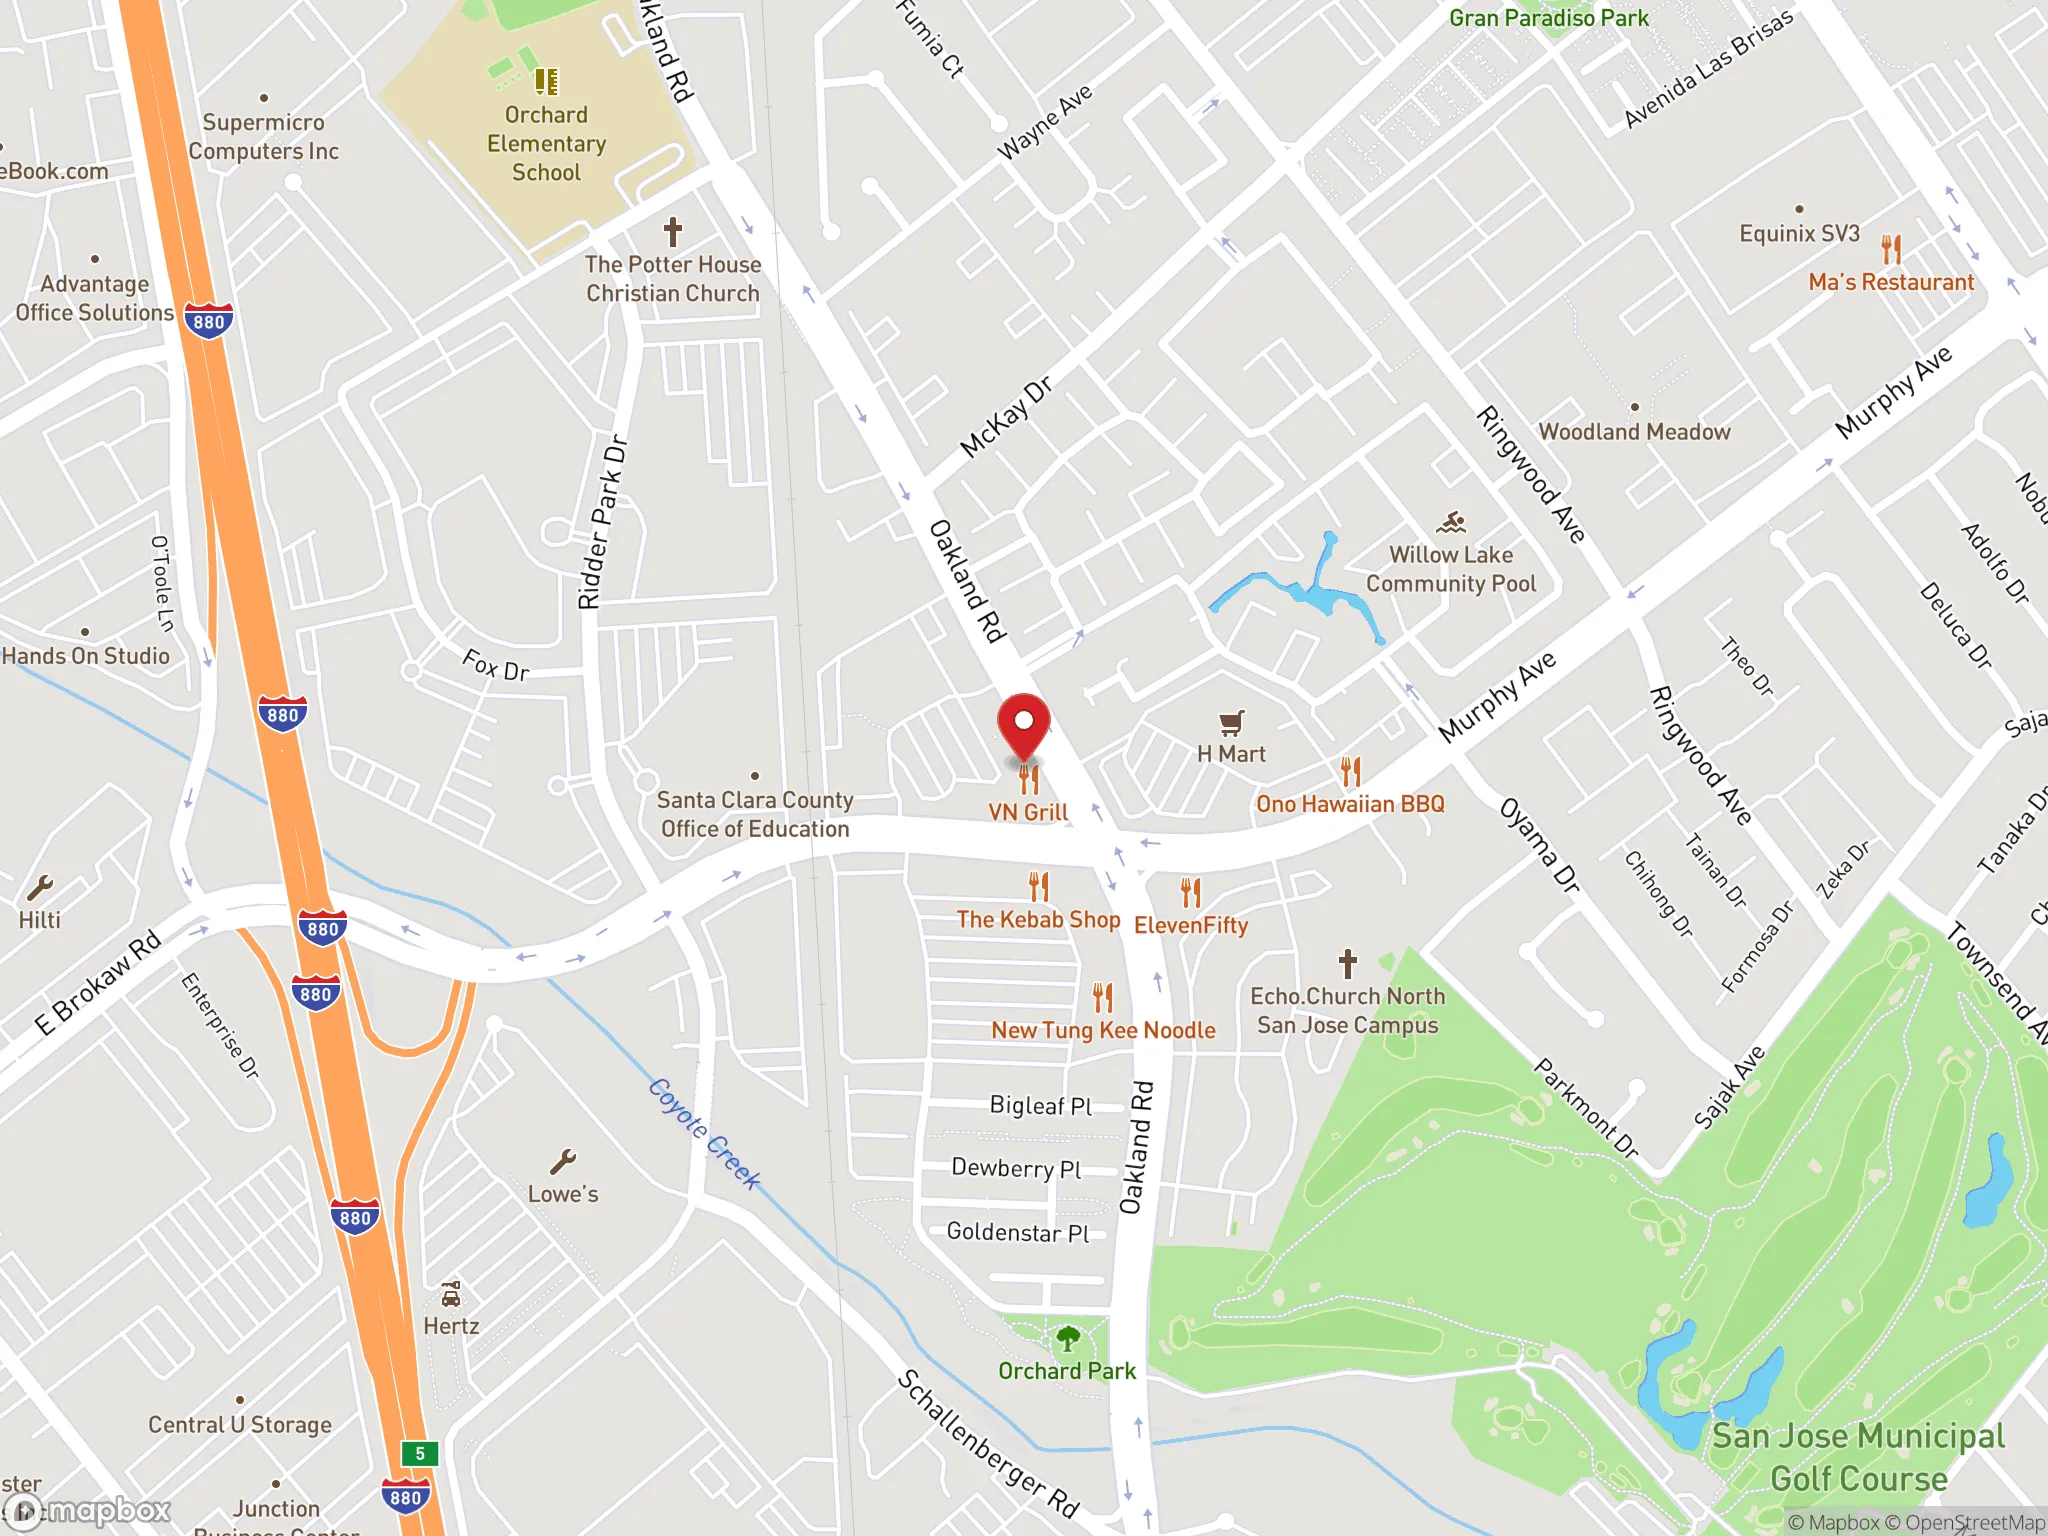 Map showing location of Dave's Hot Chicken restaurant on Brokaw Road in San Jose, California.